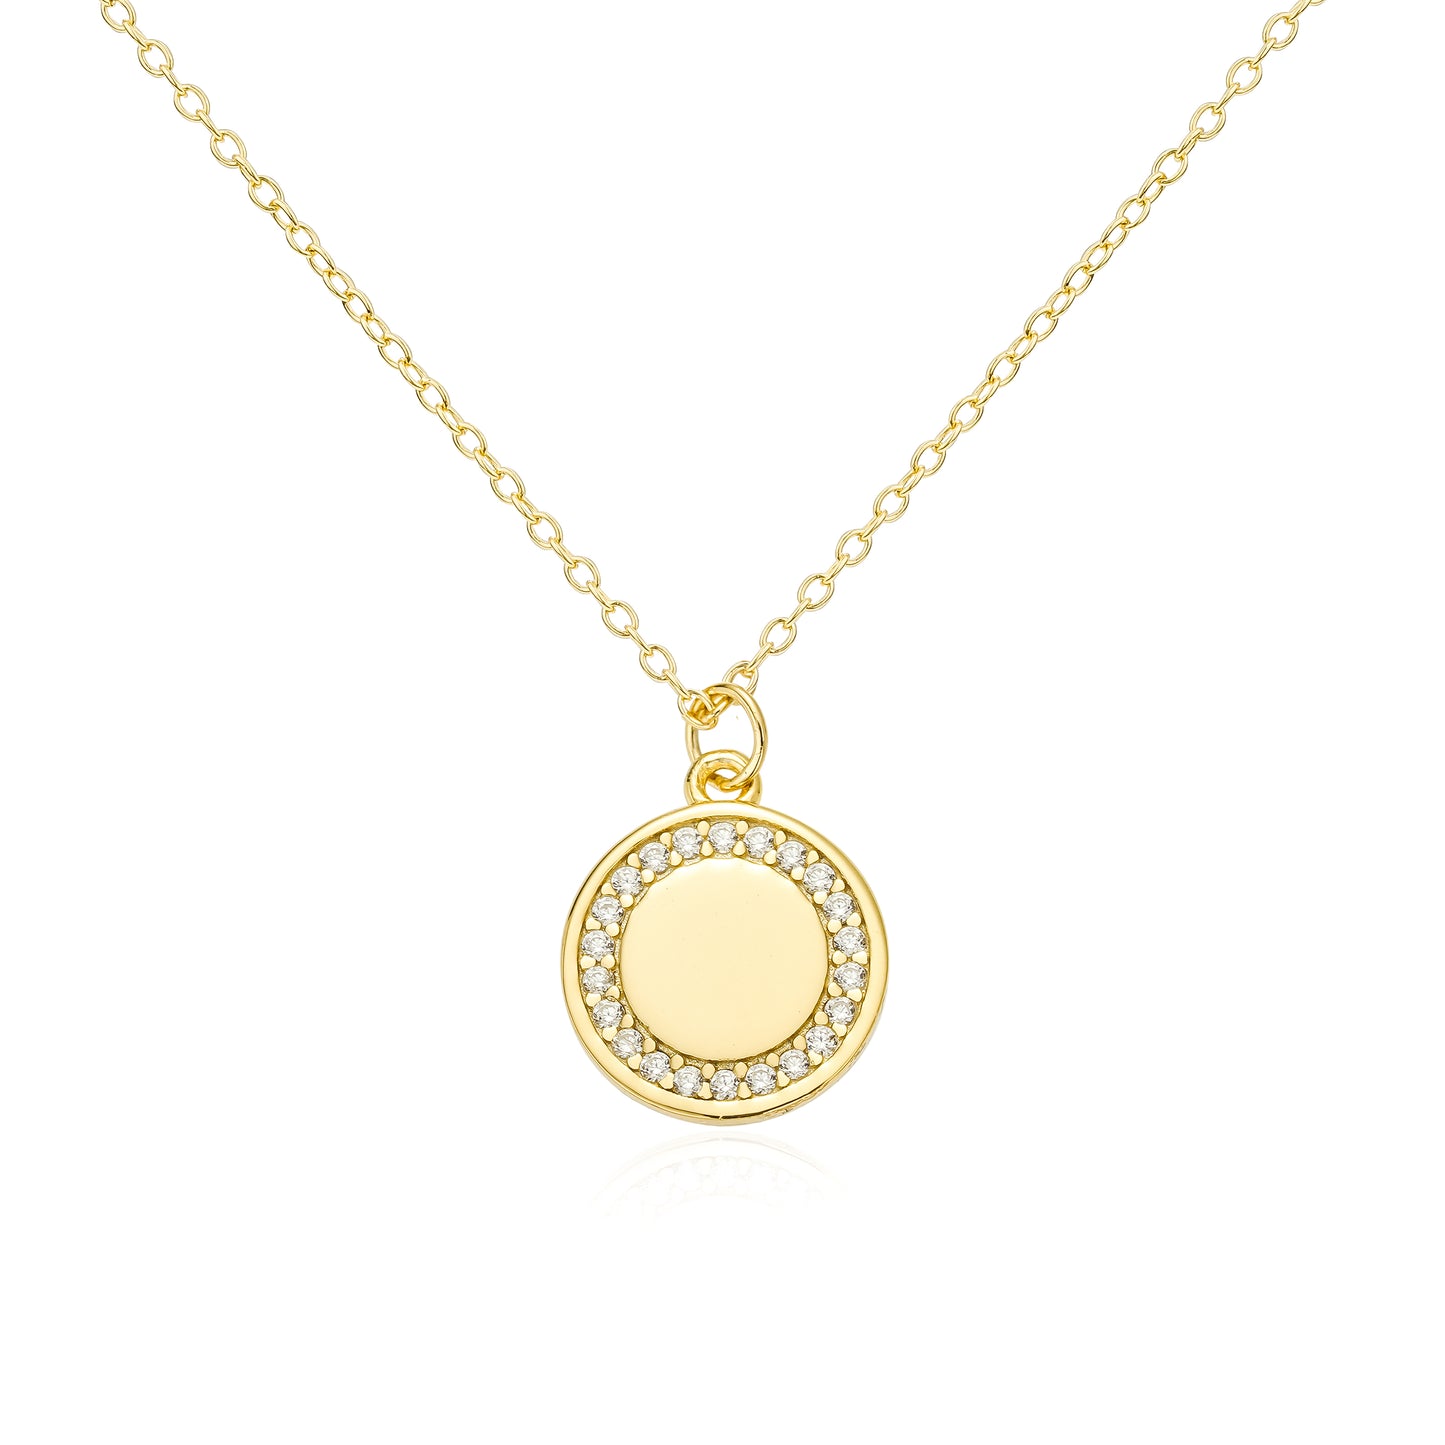 Halo pendant - gold plated - sterling silver - 18" ECO Chain Necklace